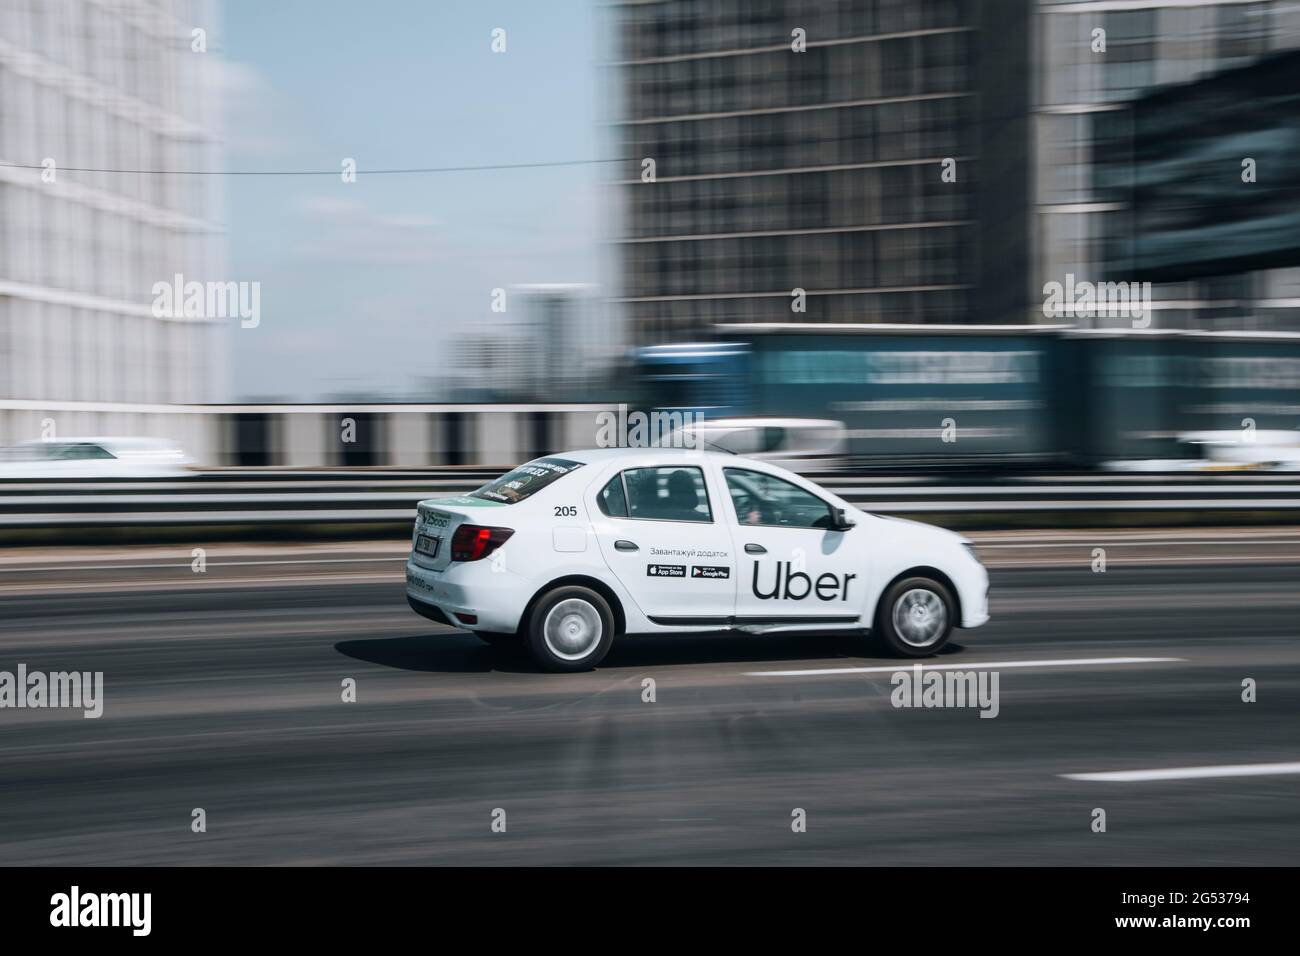 Ukraine, Kyiv - 29 April 2021: White Renault Duster Taxi Uber car moving on the street. Editorial Stock Photo